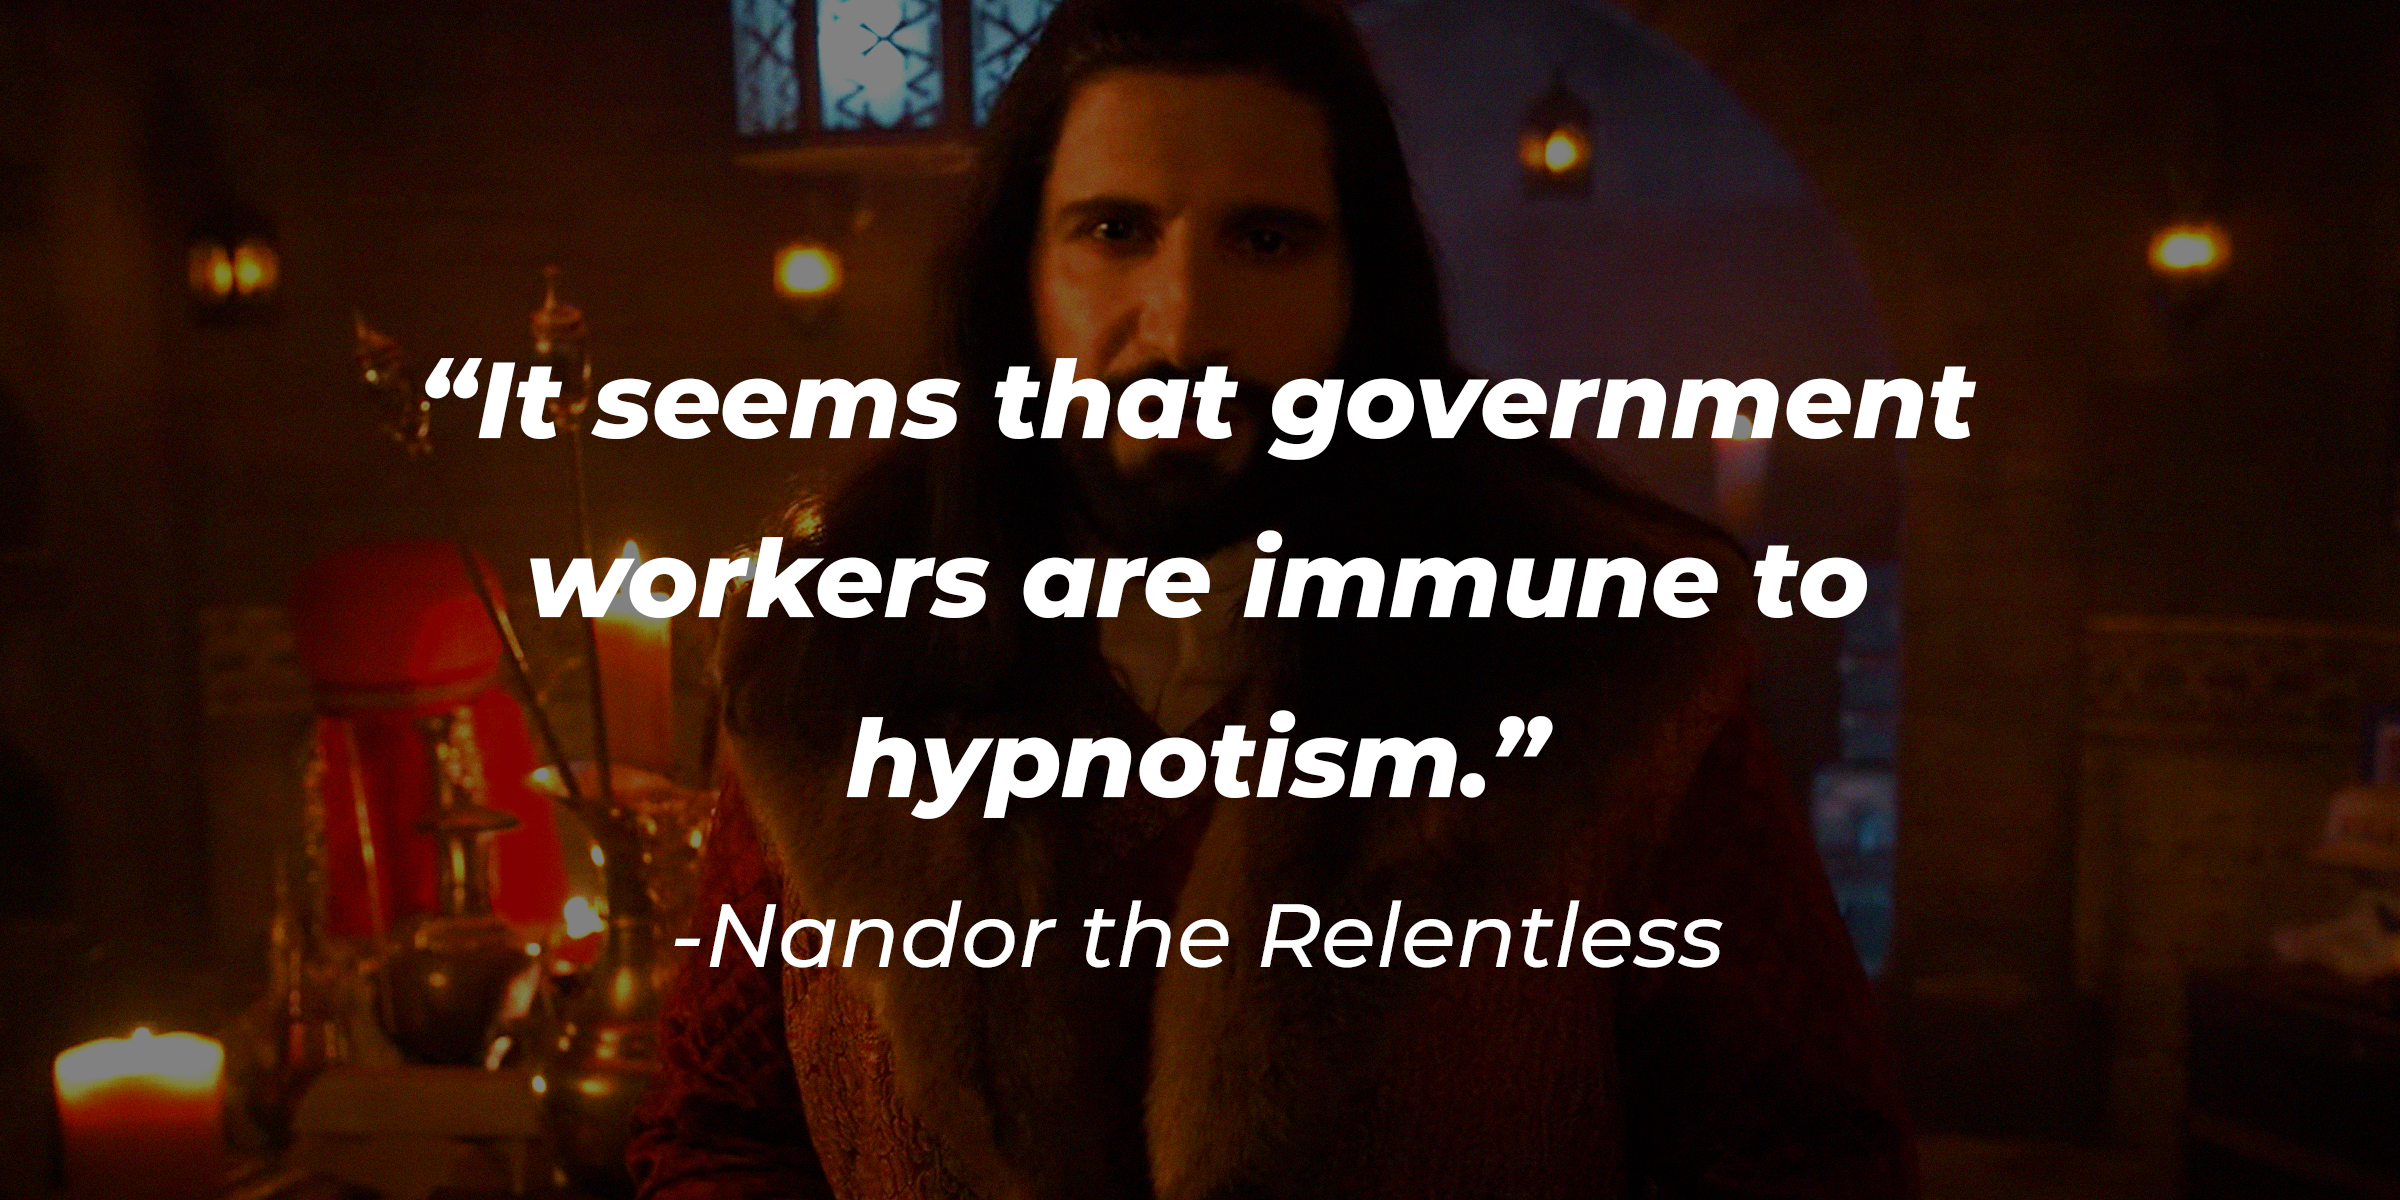 Nandor the Relentless, with his quote: “It seems that government workers are immune to hypnotism.” | Source: Facebook.com/TheShadowsFX